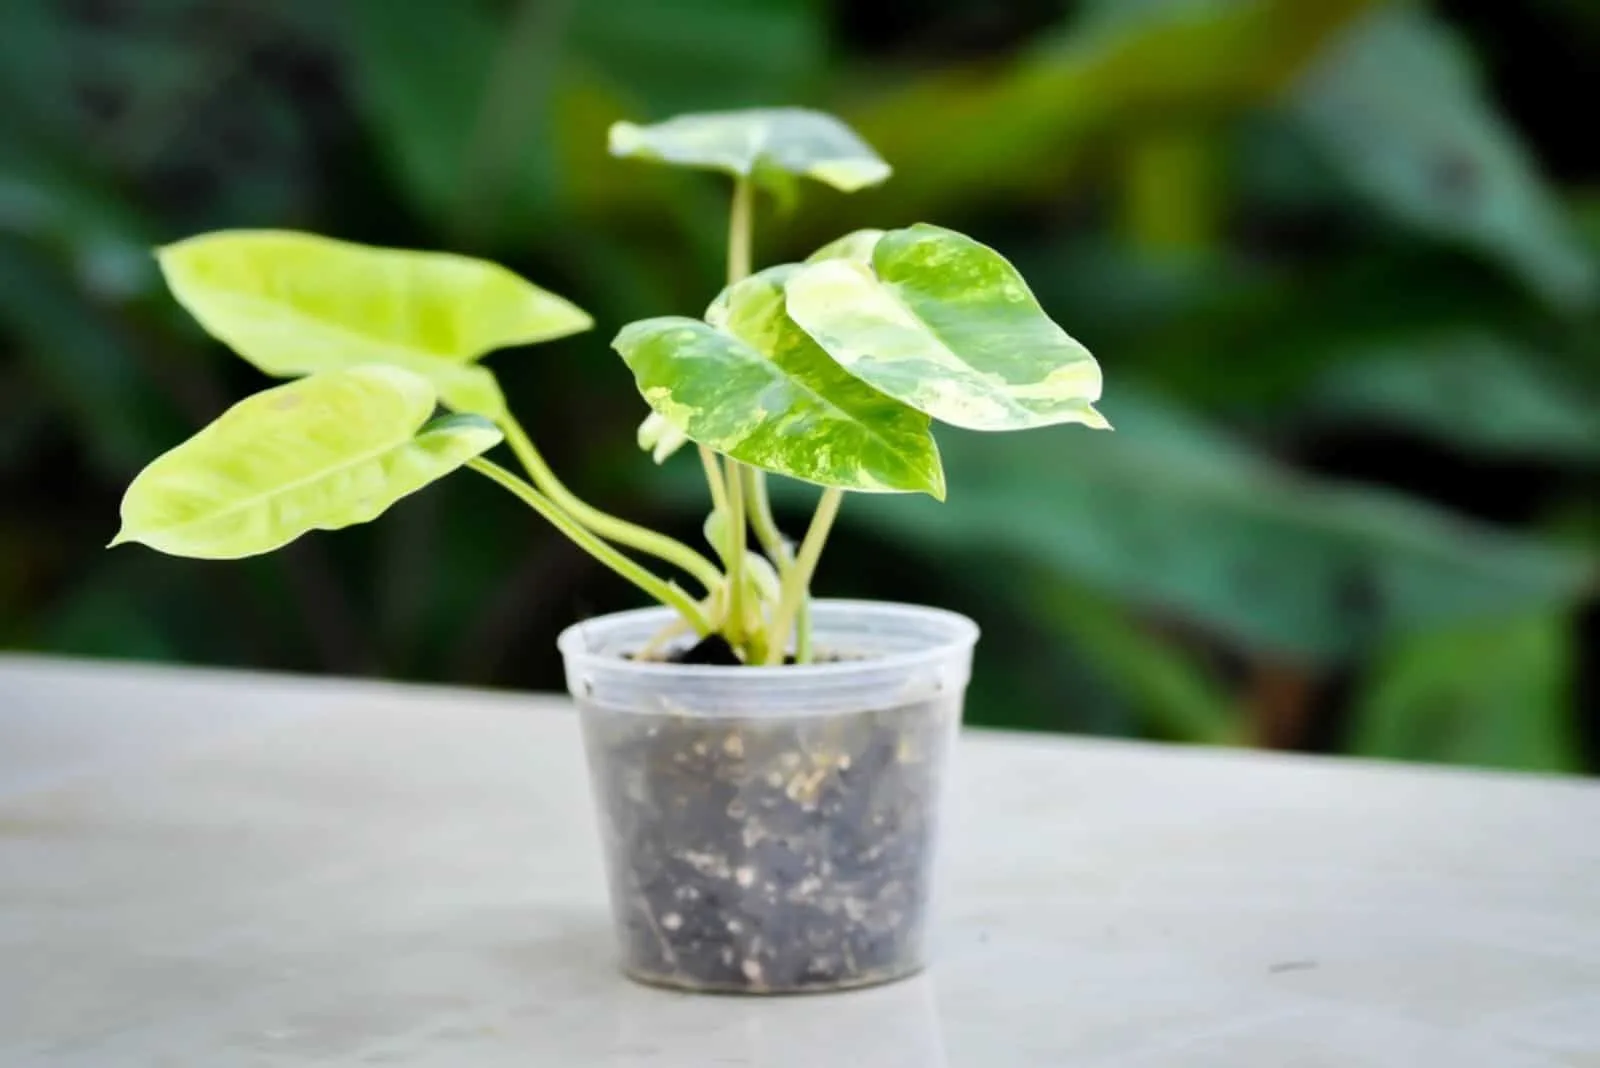 Philodendron Burle Marx in little pot on the table